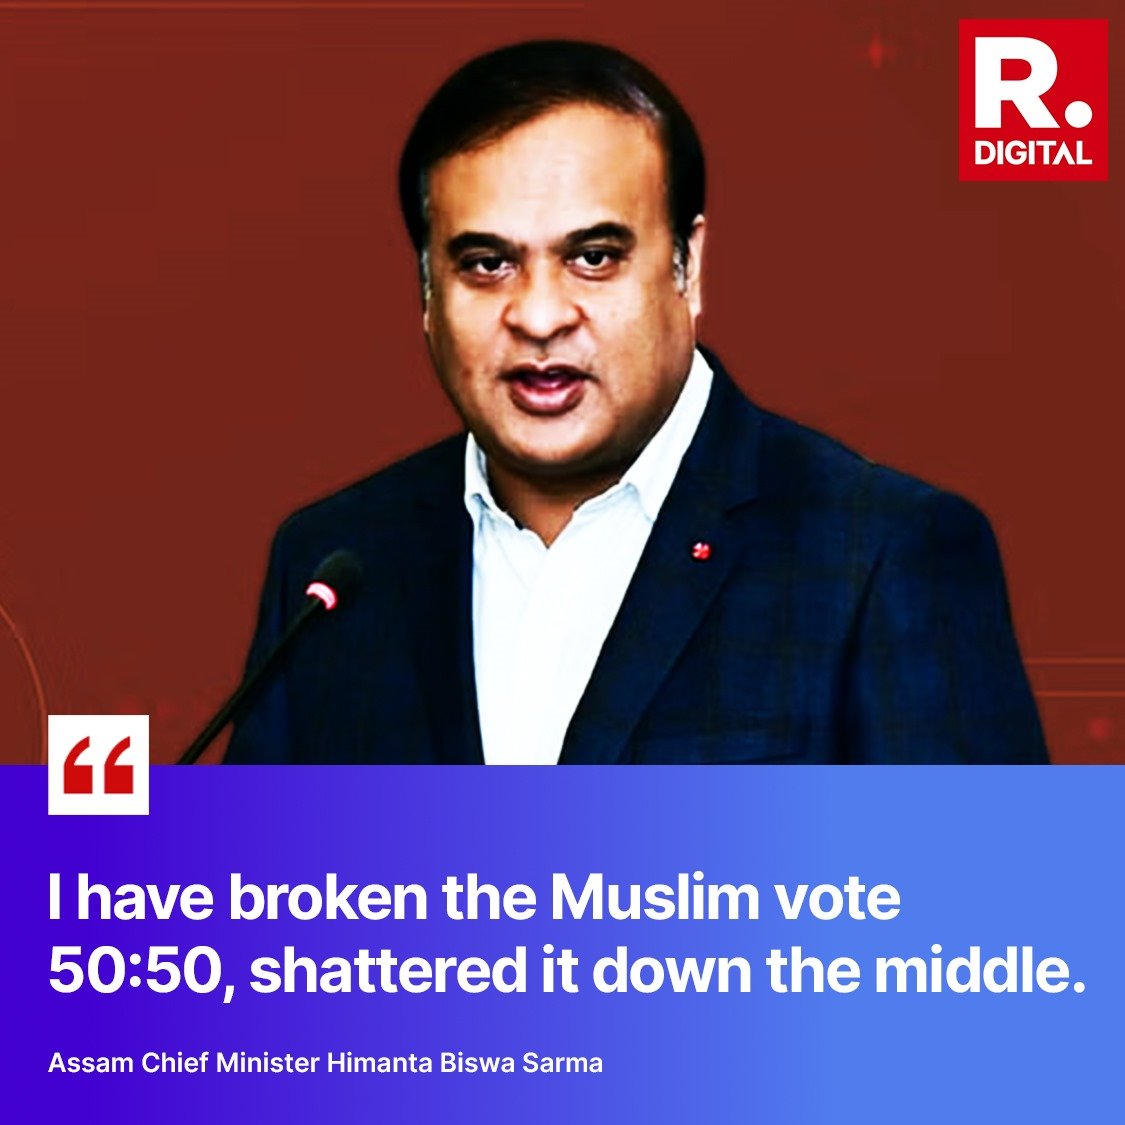 #HimantaAndArnab | We won't allow Sharia law in India. Three marriages and child marriage won't be accepted here: Assam CM Himanta Biswa Sarma (@himantabiswa) Tune in here - youtube.com/watch?v=9vhK2l…